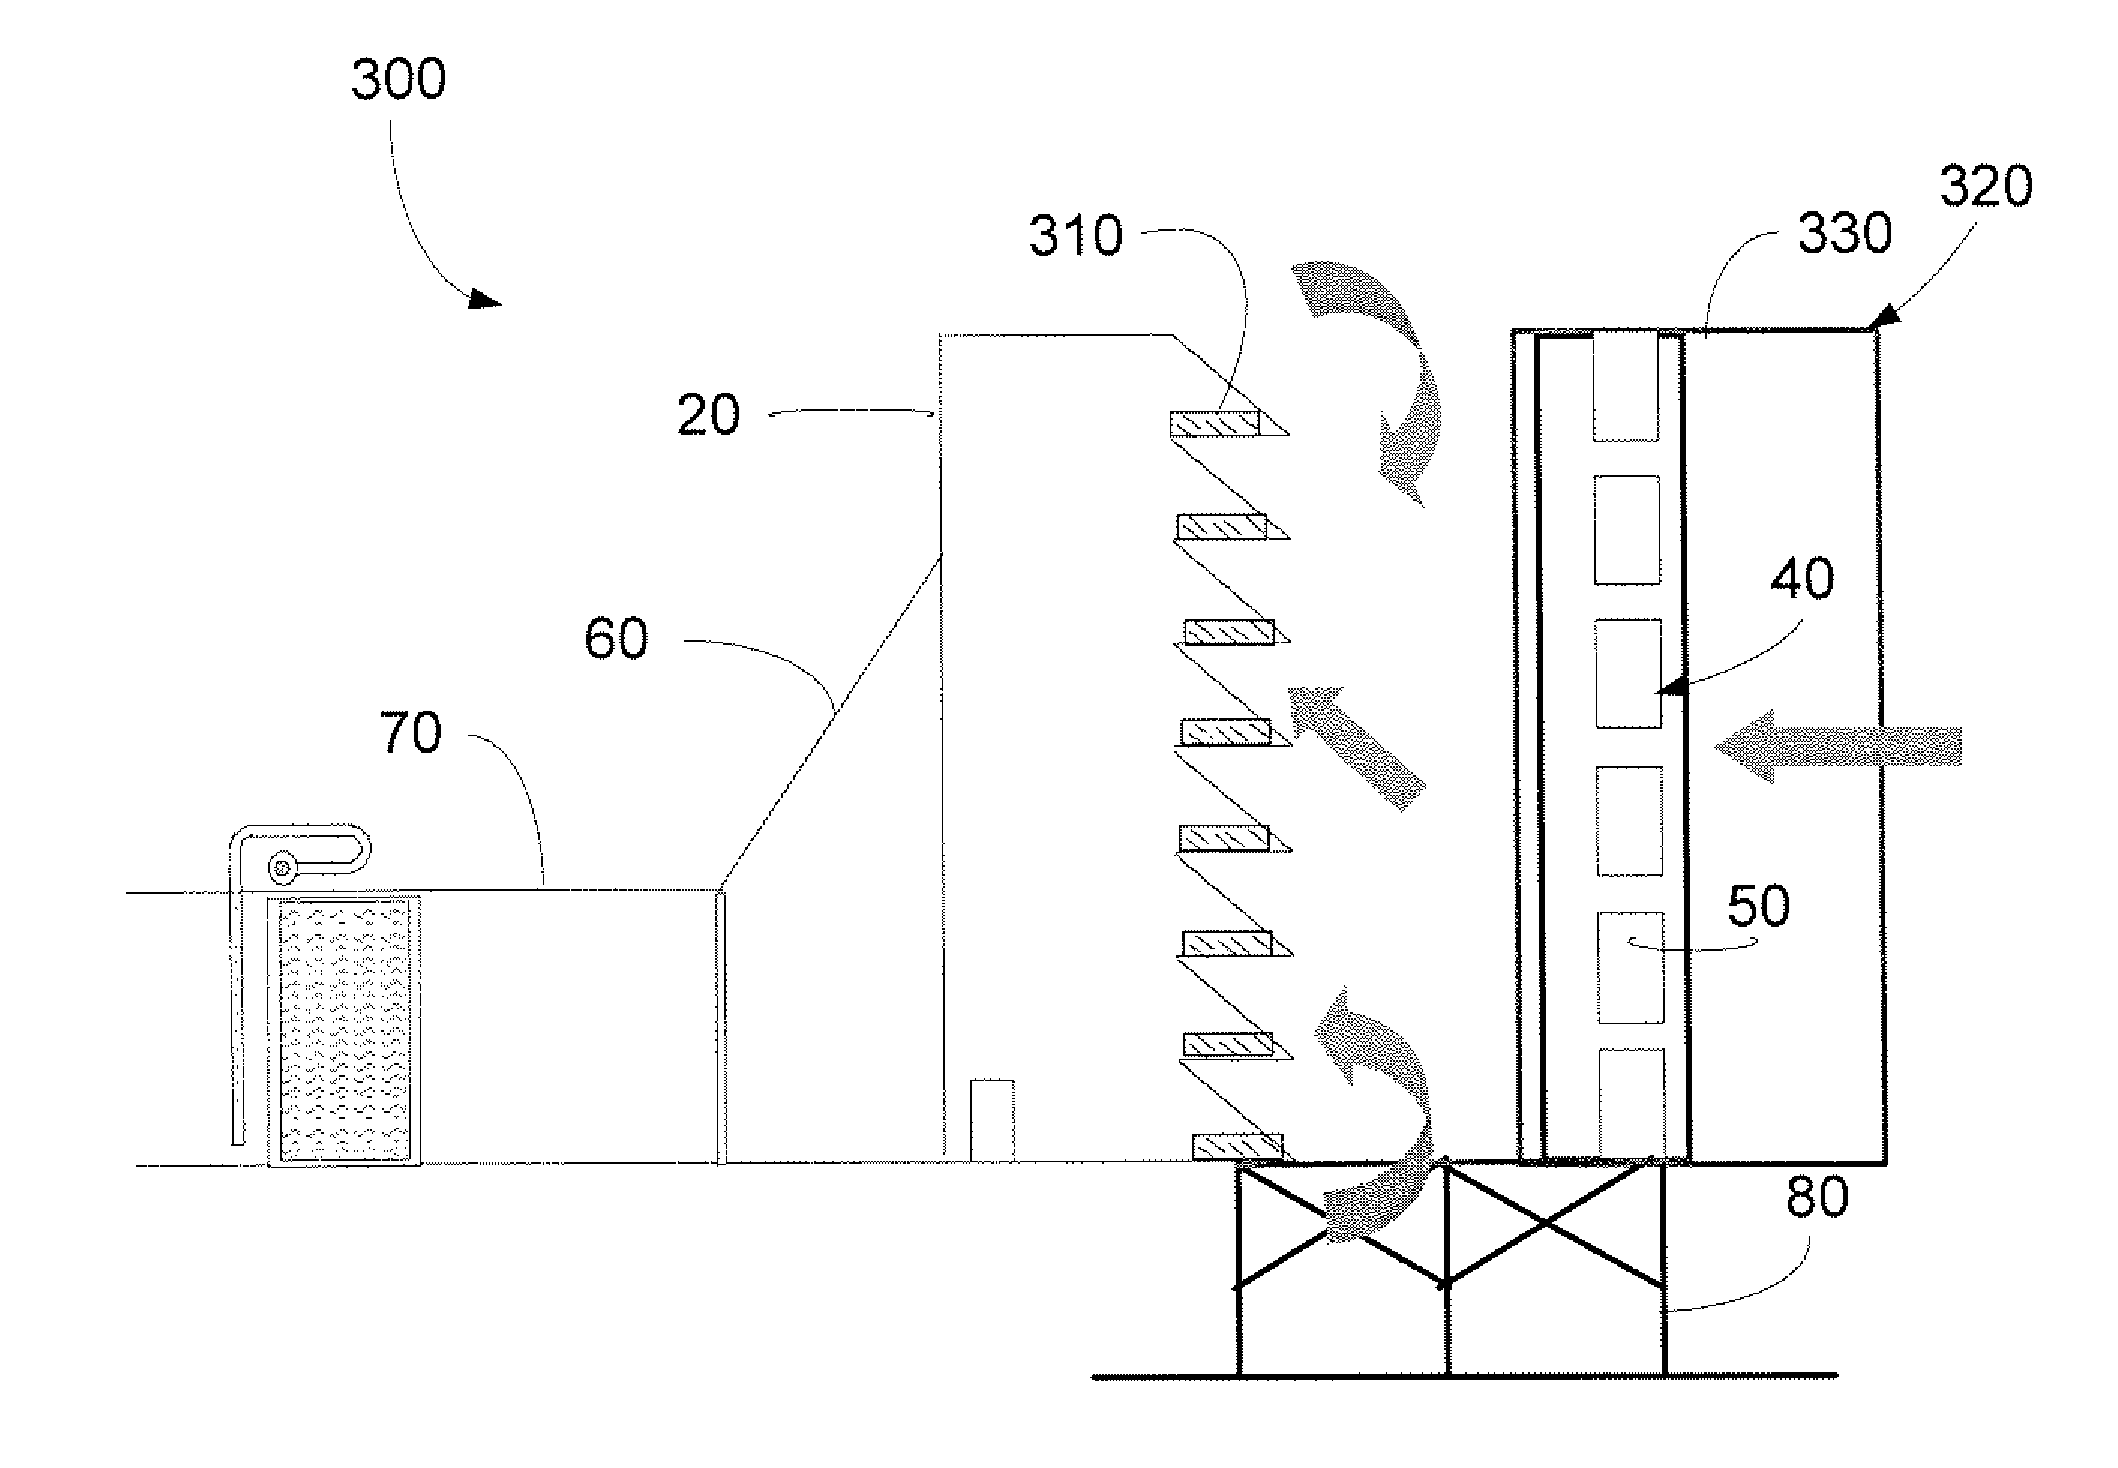 Air bypass system for gas turbine inlet